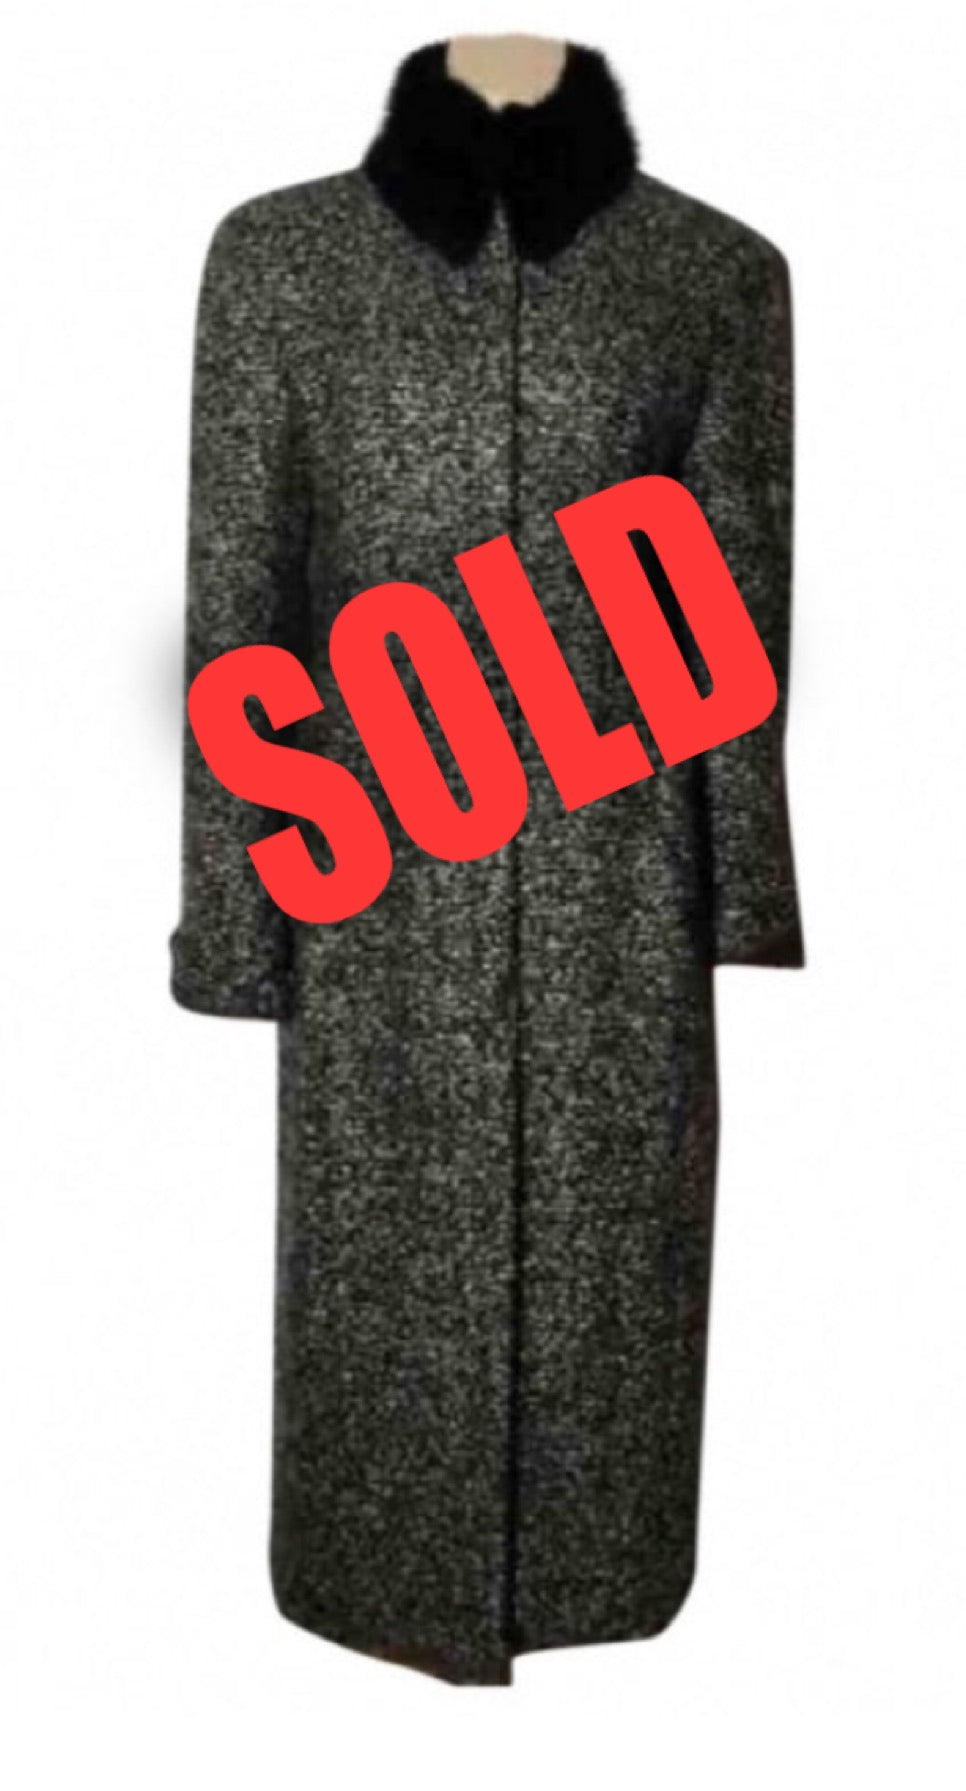 Sophisticated Chanel 02A 2002 Fall Long Wool Tweed Black White Duster Removable Fur Trim Collar Coat Jacket FR 40